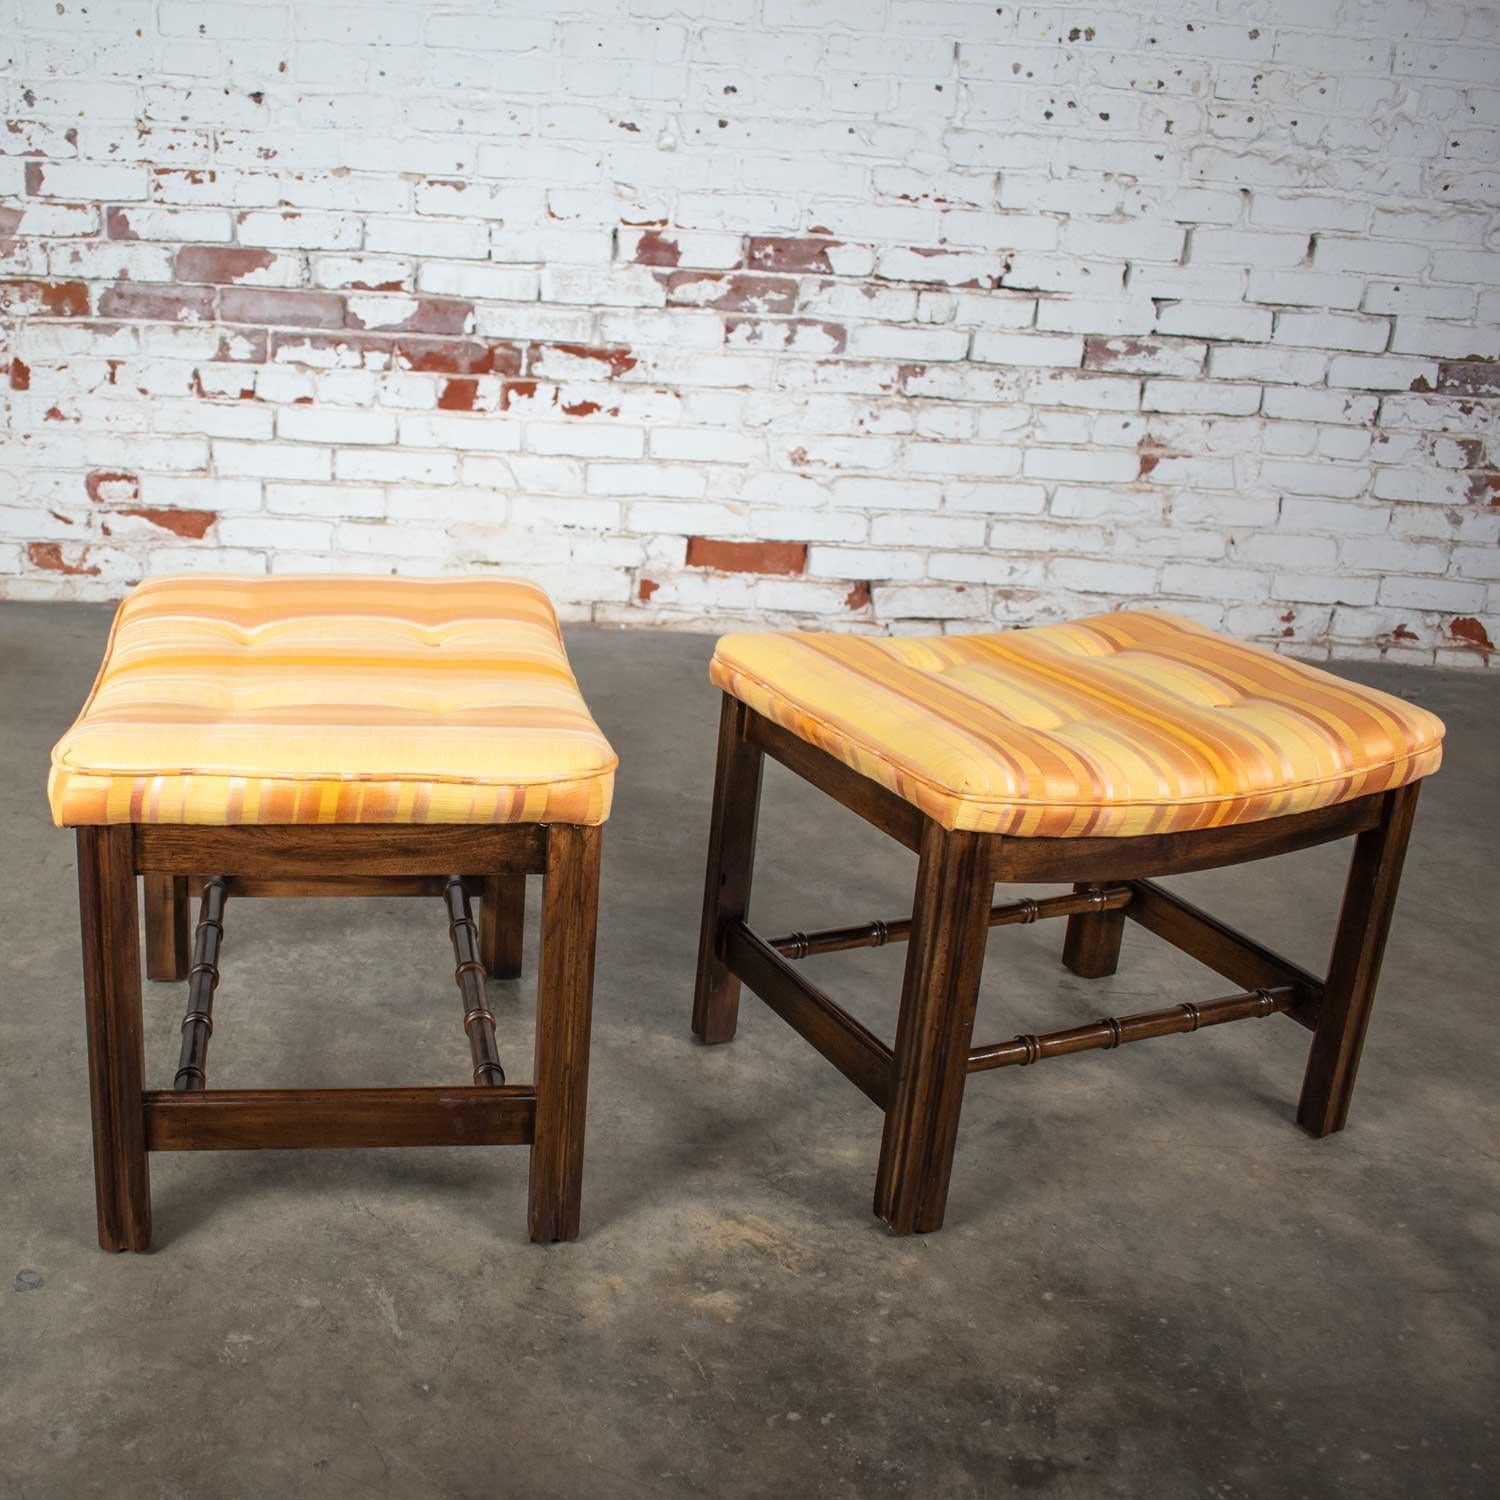 Chinese Chippendale Pair of Foot Stools in Orange and Yellow Stripe Upholstery 4